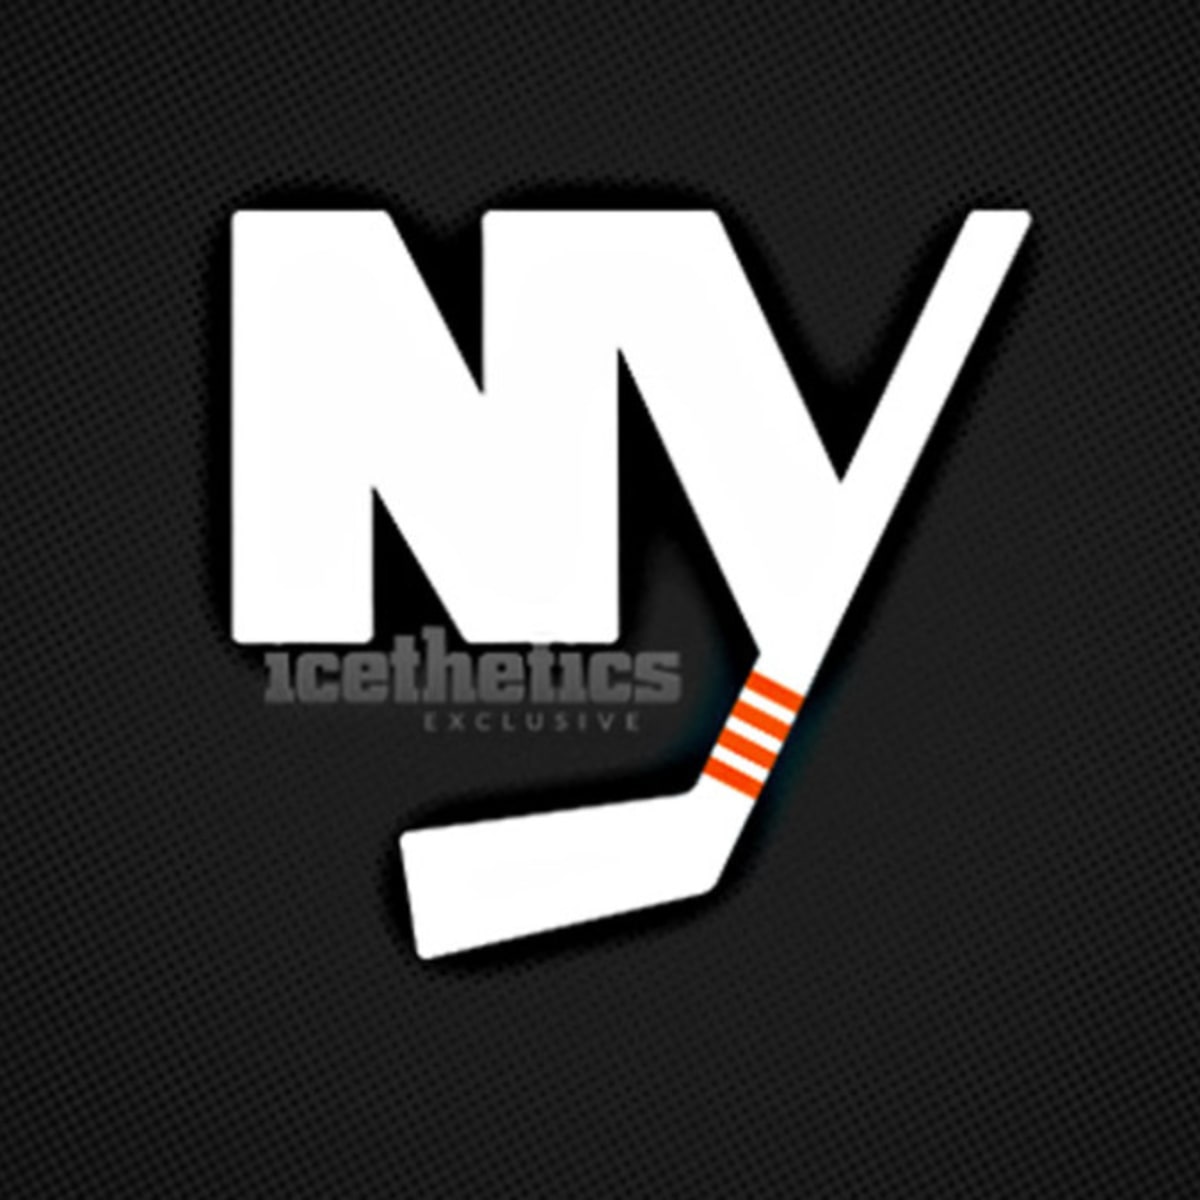 Islanders to get black and white jersey in Brooklyn  as an